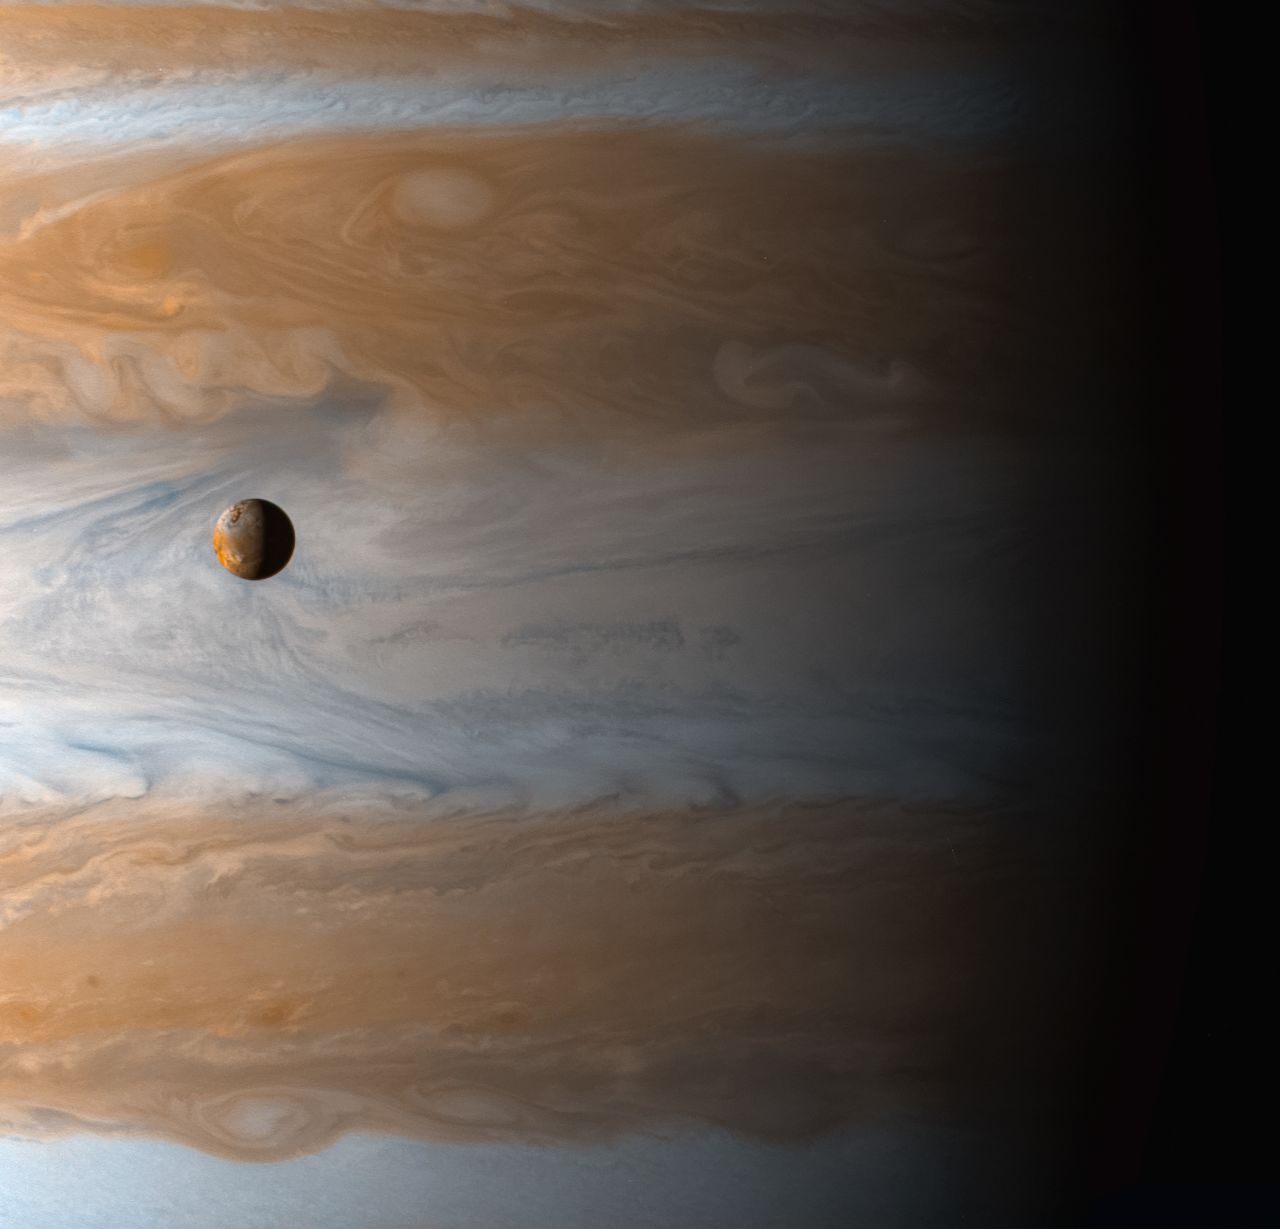 Jupiter's moon Io as seen by the Cassini spacecraft, launched in 1997.